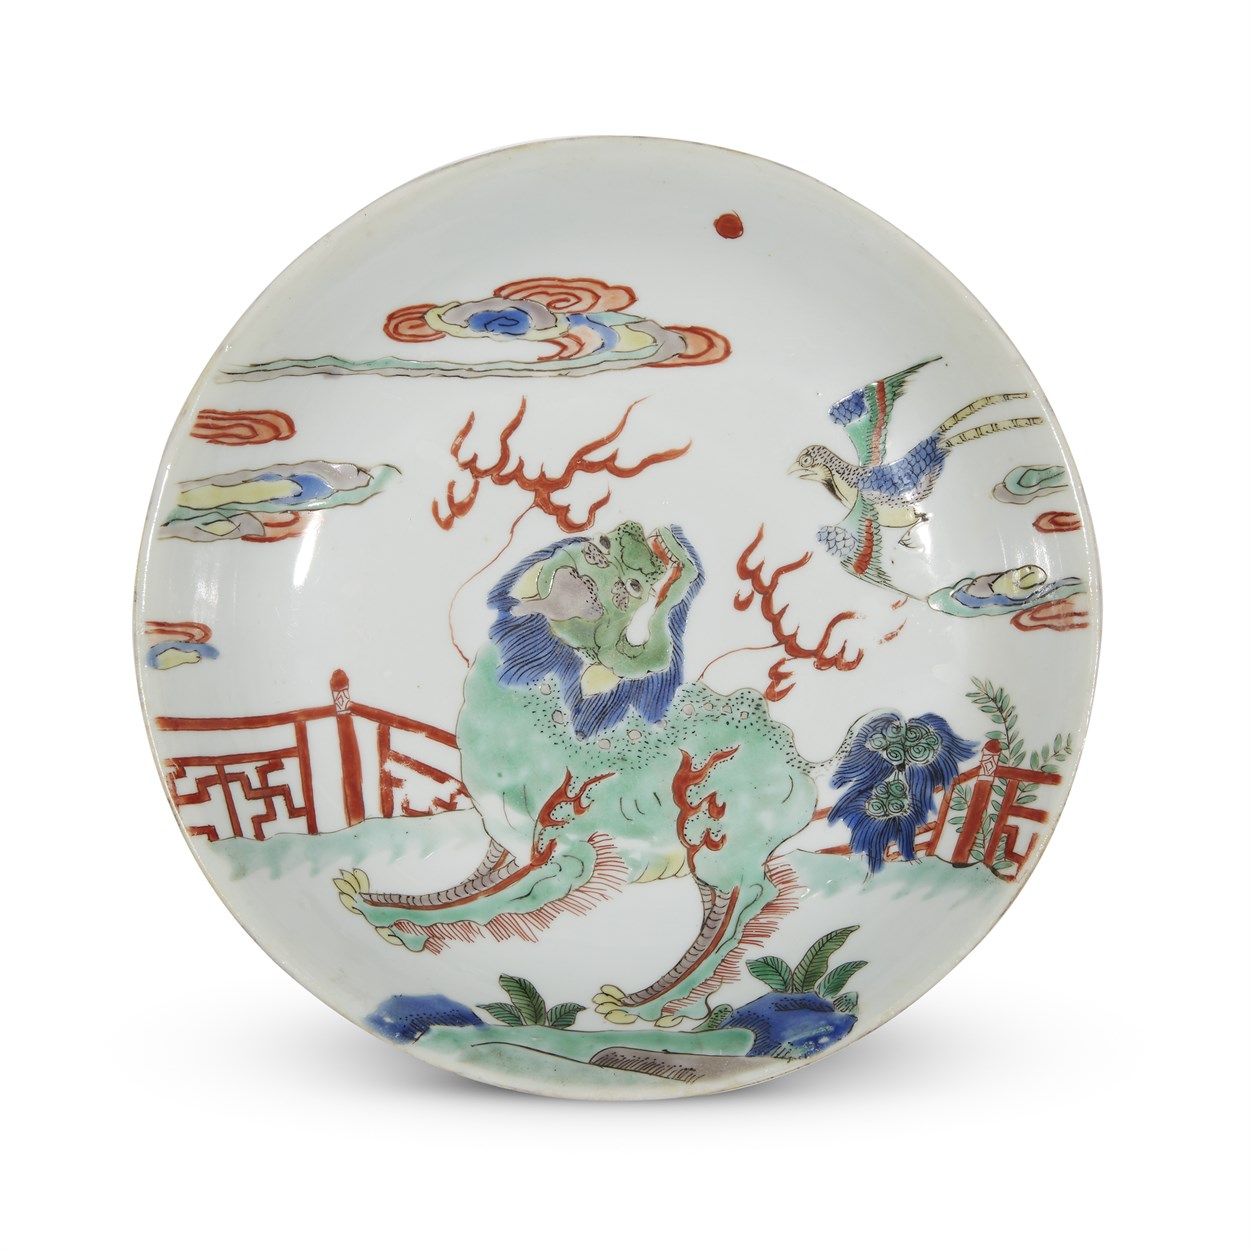 Lot 102 - Pair of Chinese famille verte-decorated porcelain "Qilin" dishes